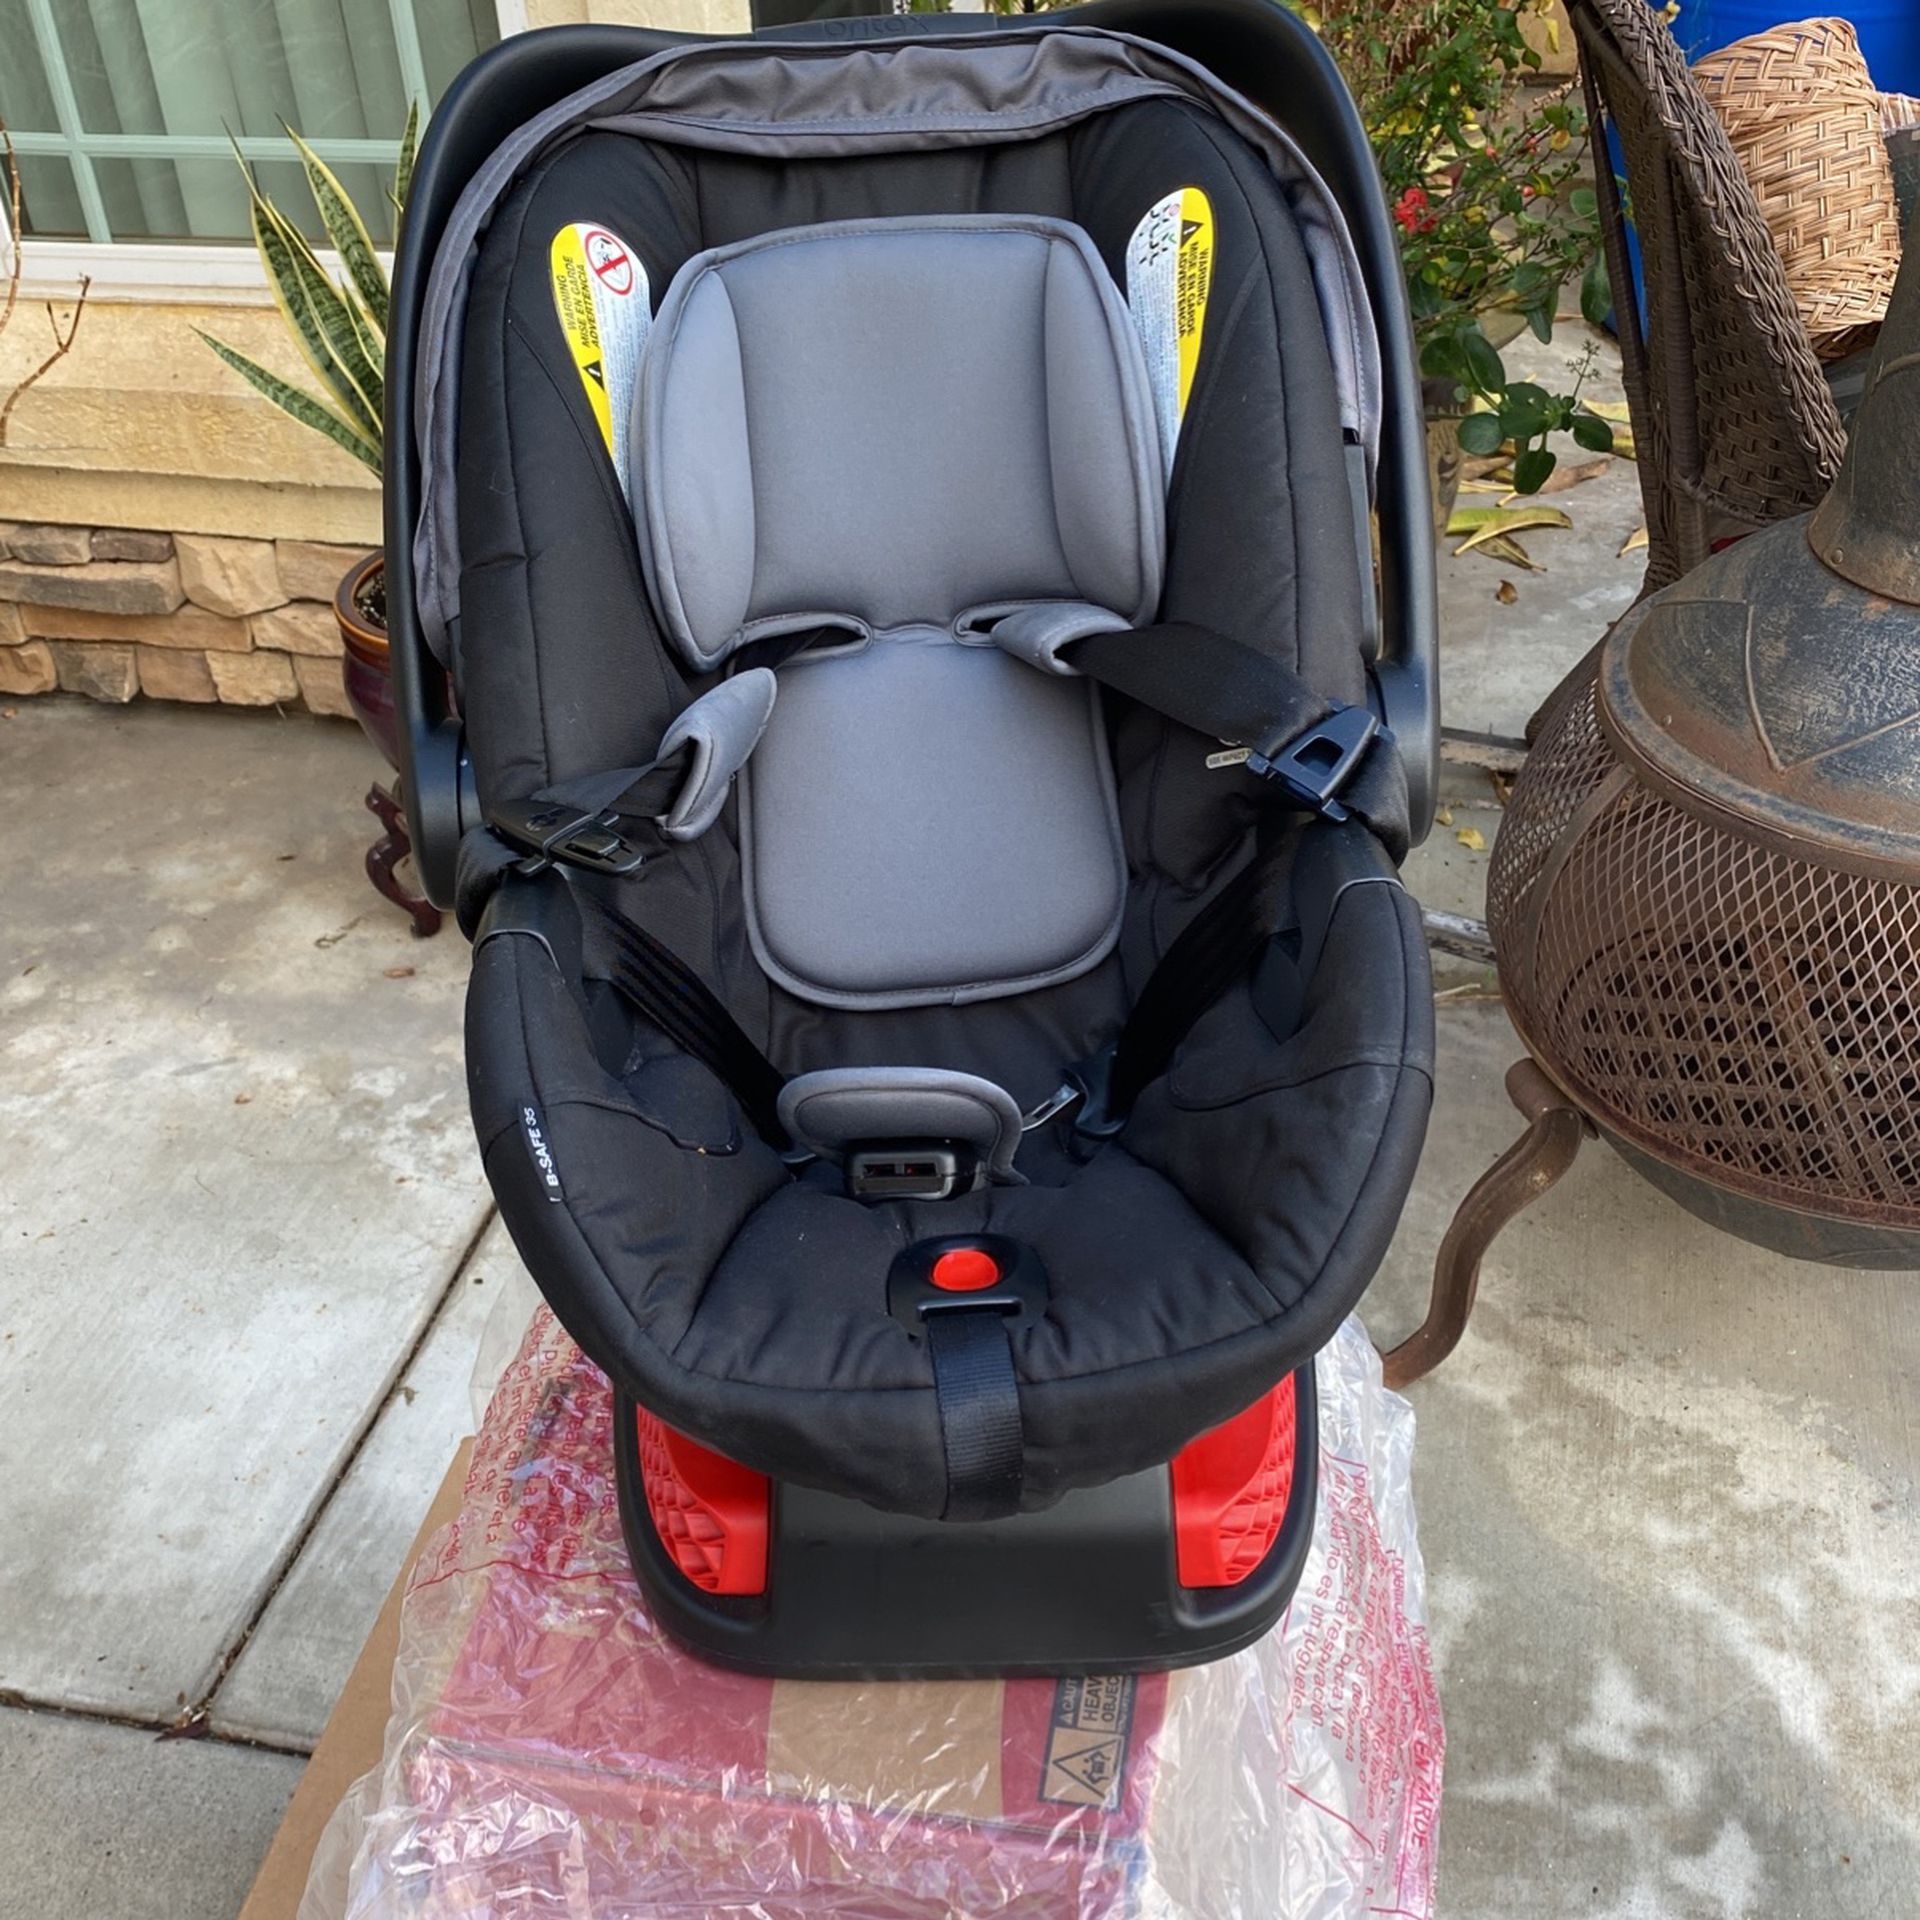 Britax New Born, Rear Facing 4-35lbs Car Seat And Anchor 18 Months Old